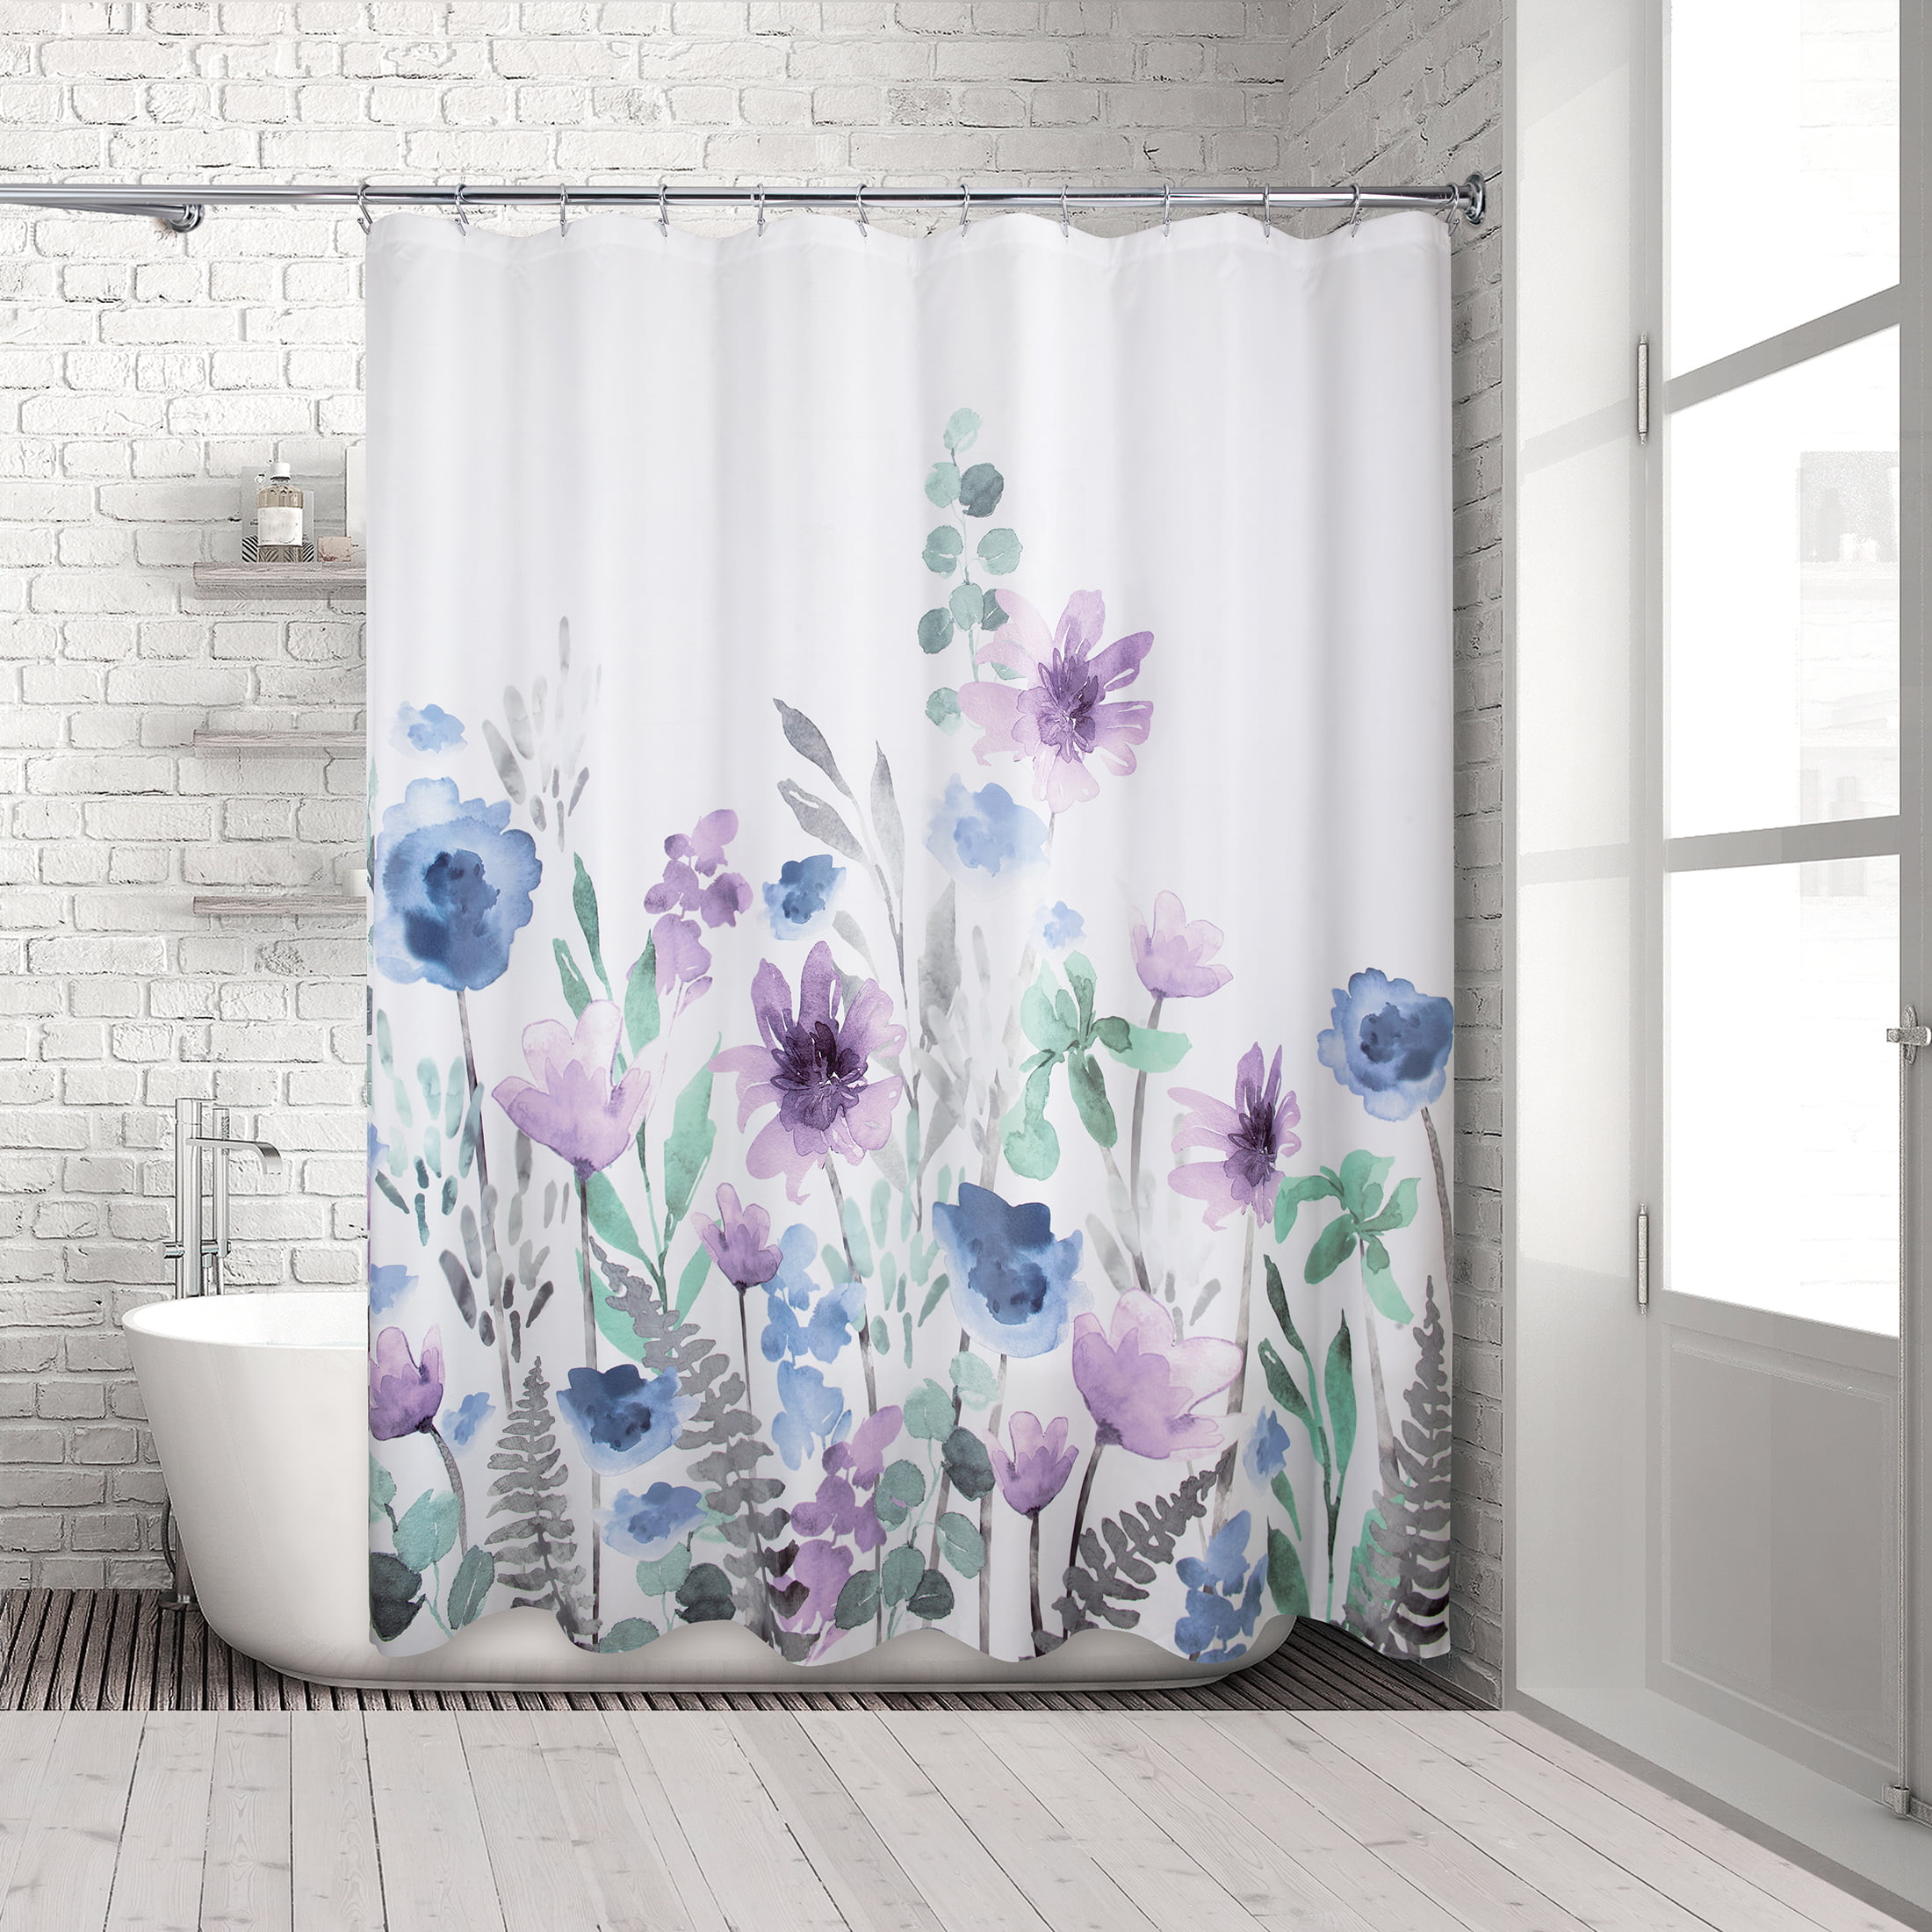 Fabric Shower Curtain for Bathroom Pruple Gray Floral Design 72IN x72 in 